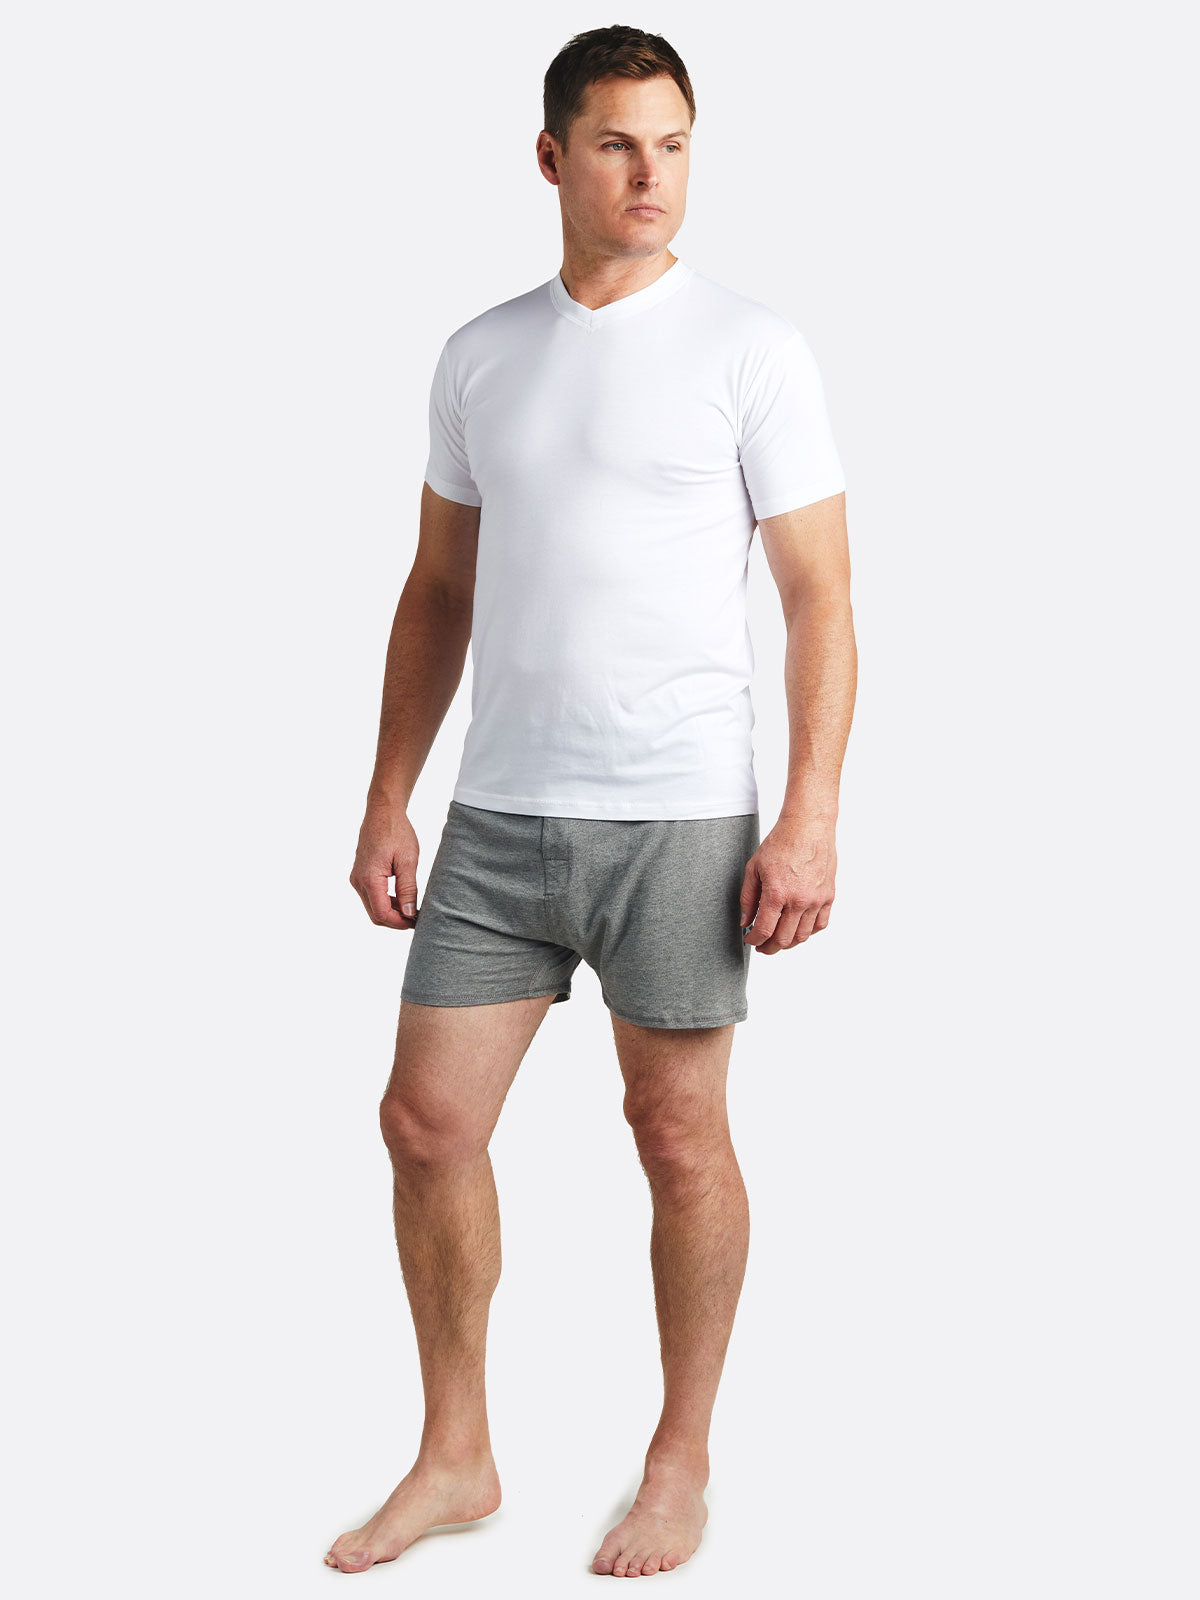 Elevated Loose Fit Boxer - Men's Underwear - tasc Performance